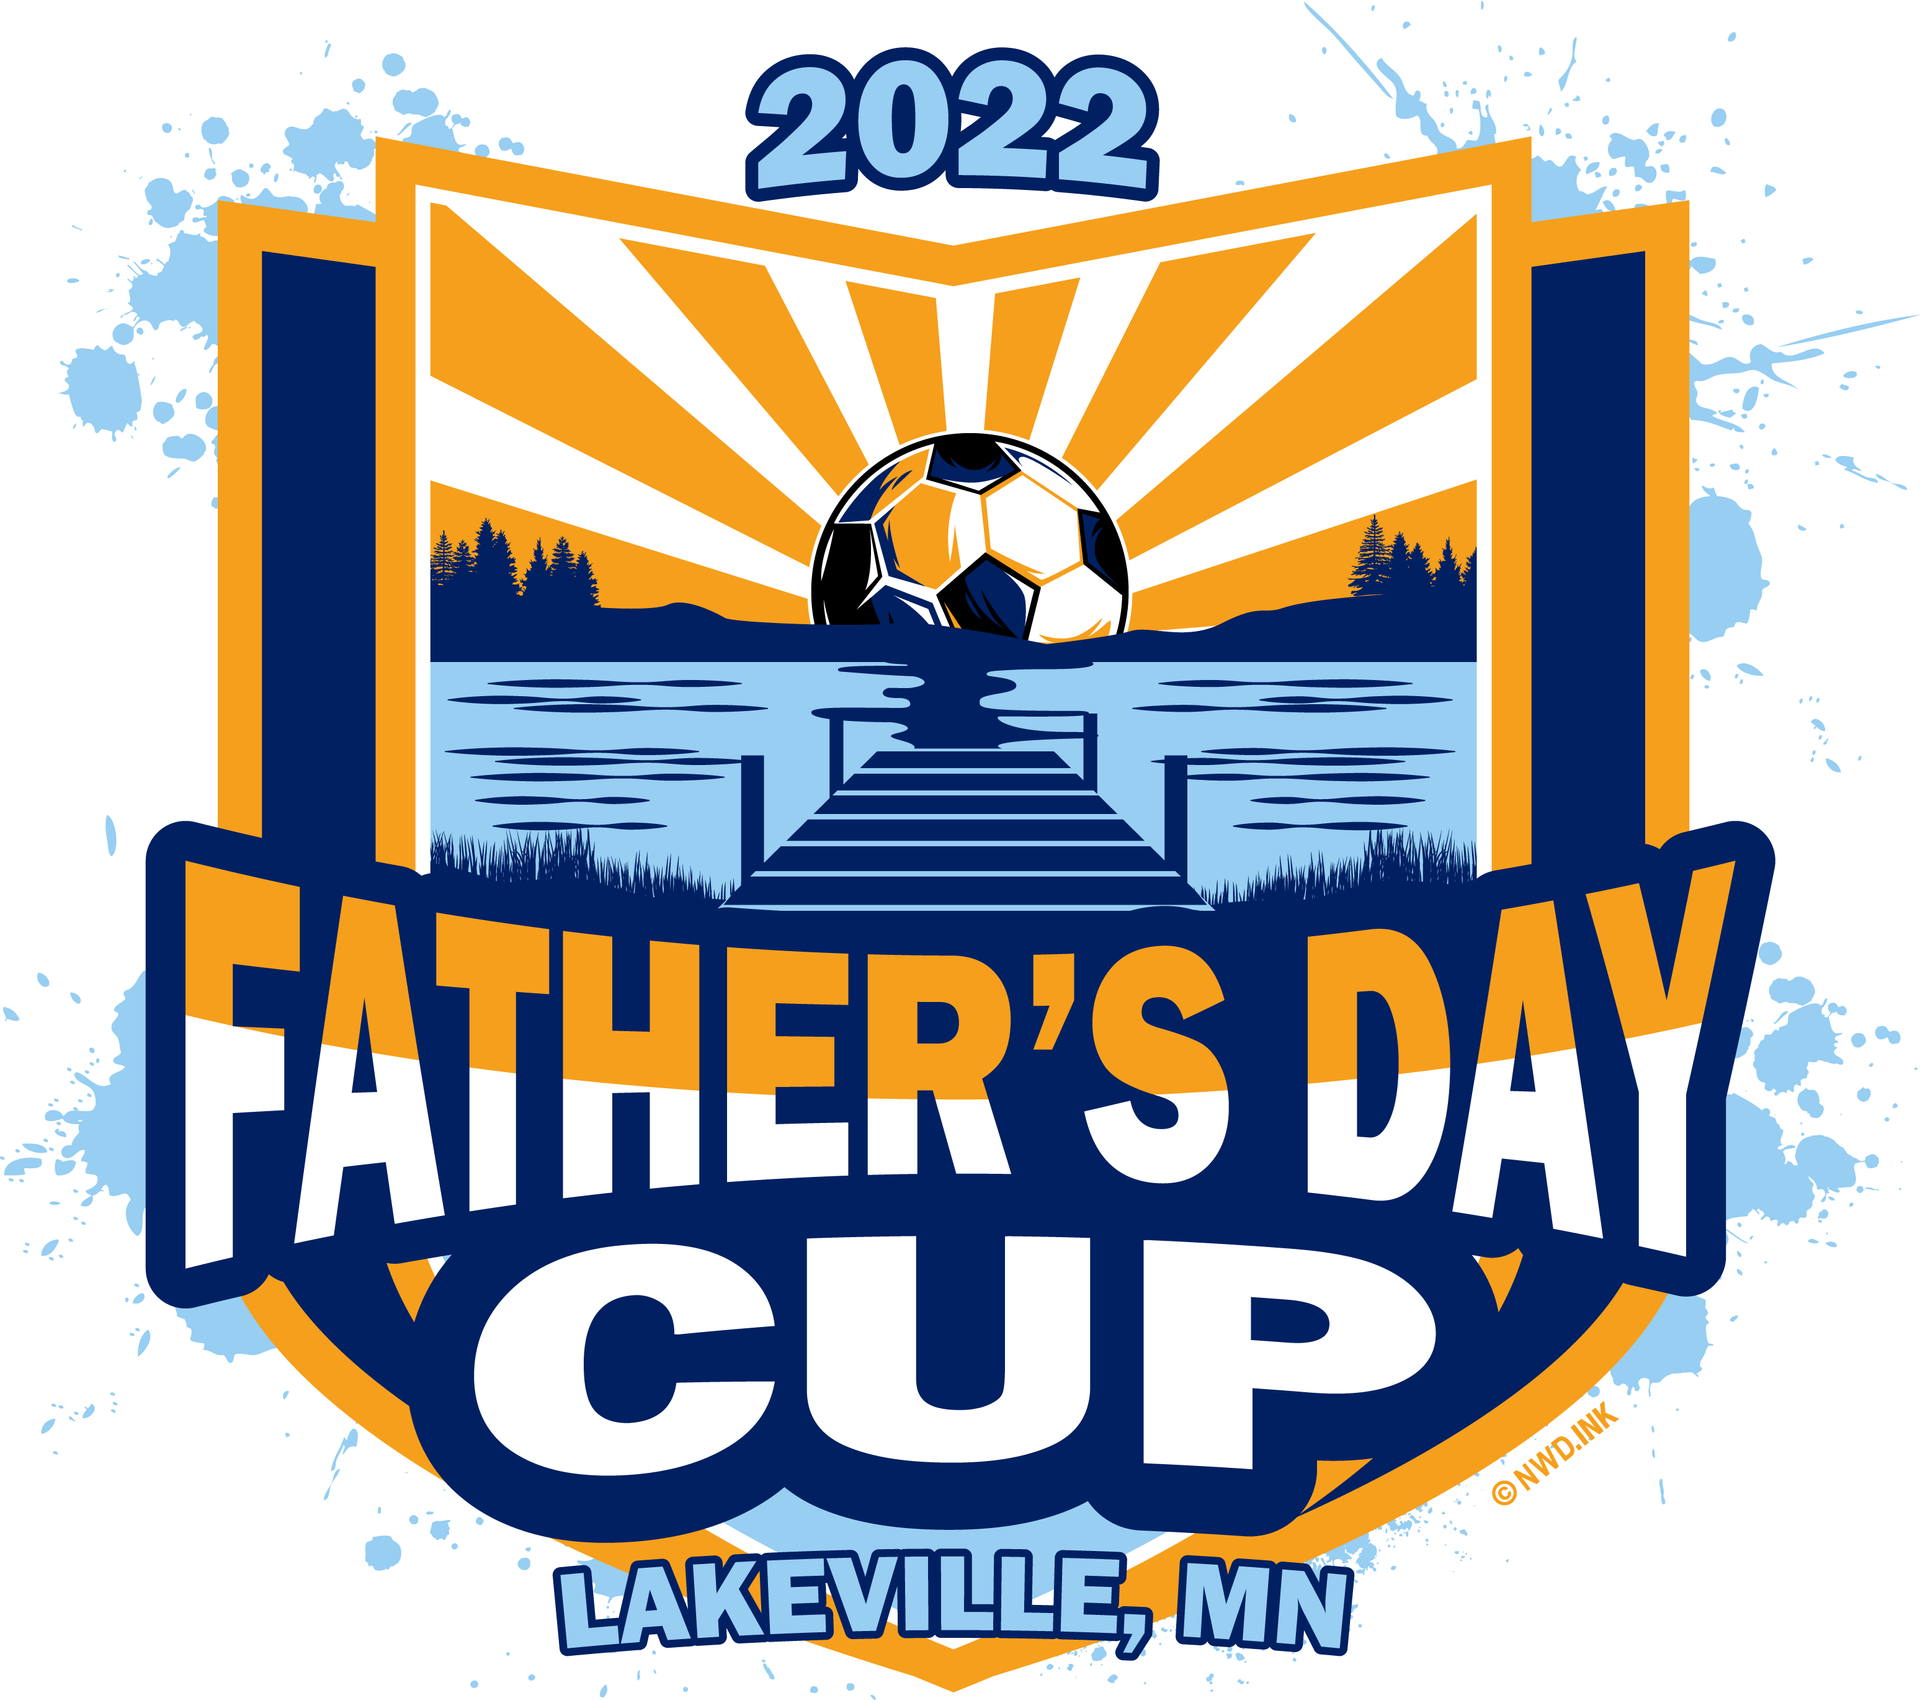 Father's Day Cup